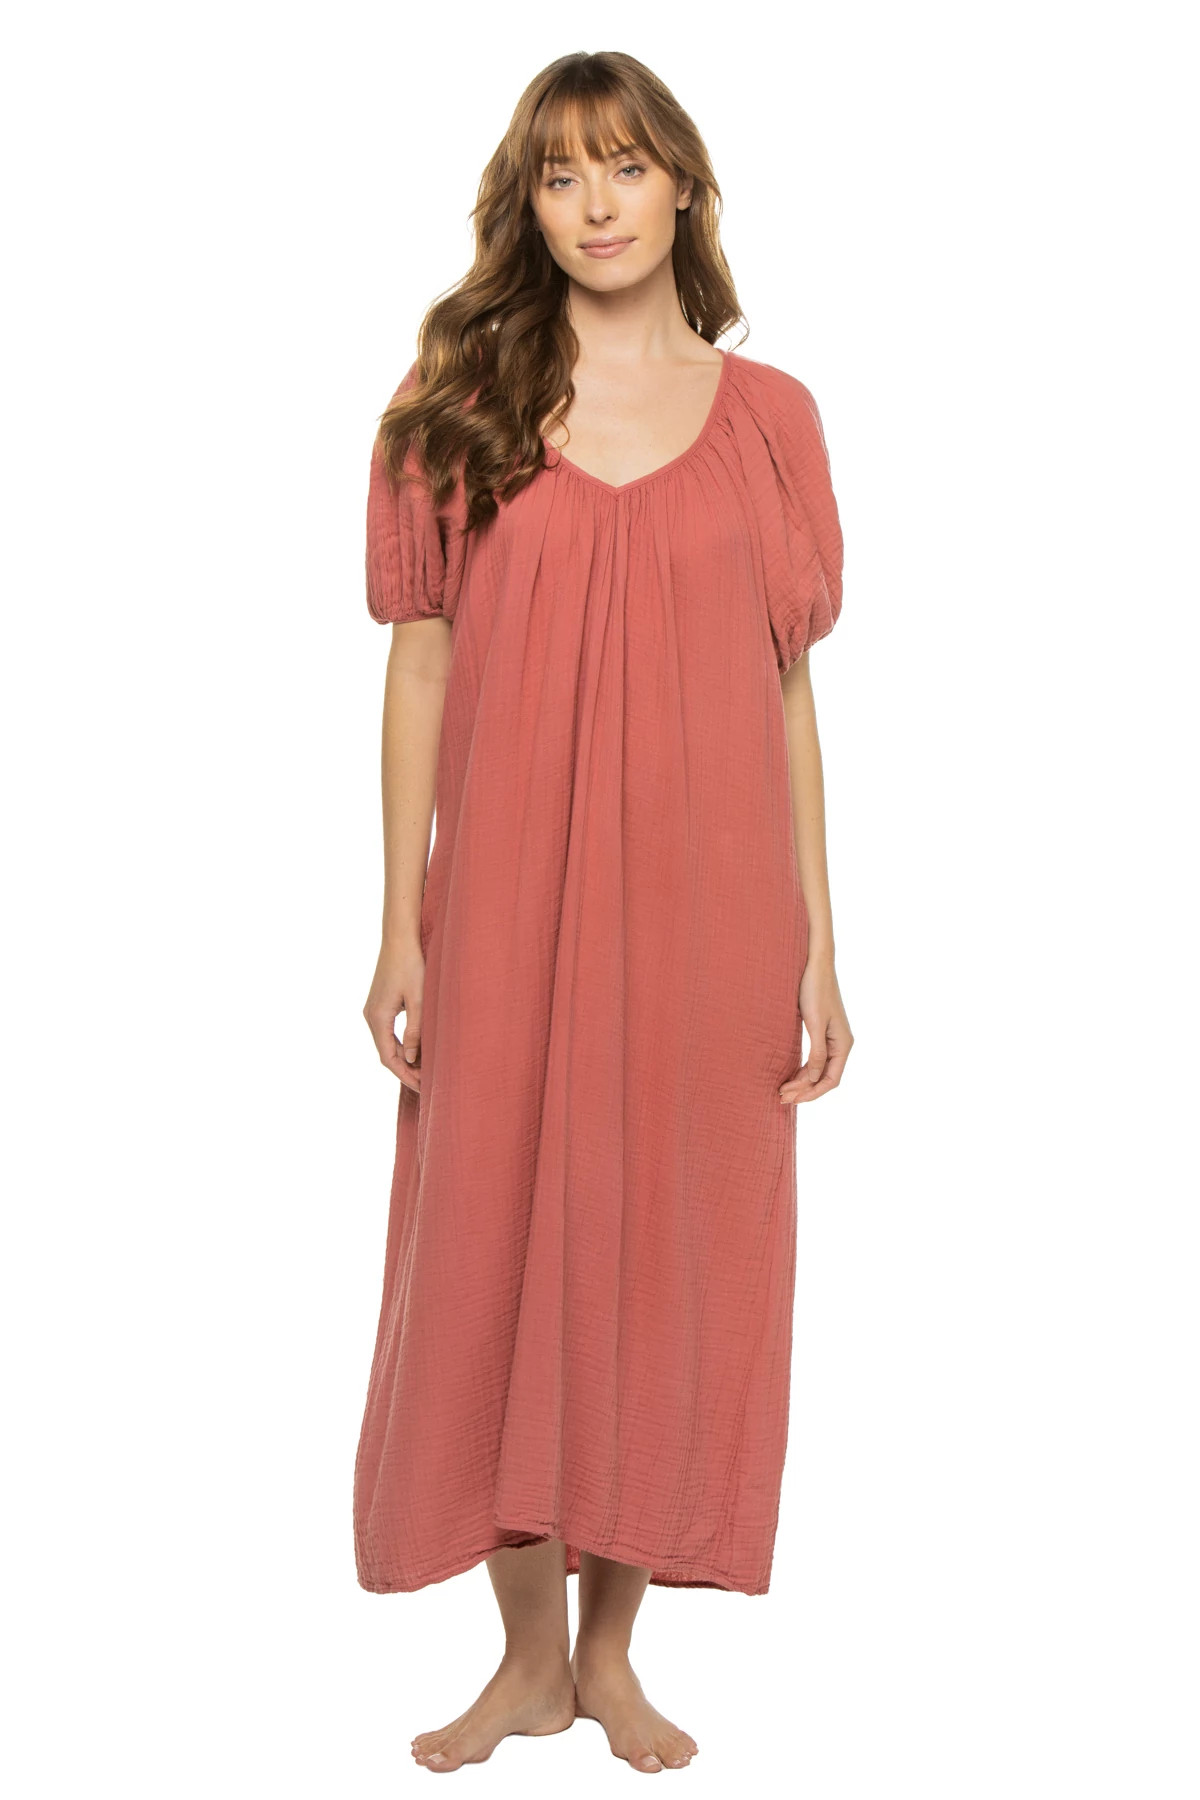 GUAVA Sand Hill Cove Dress image number 1